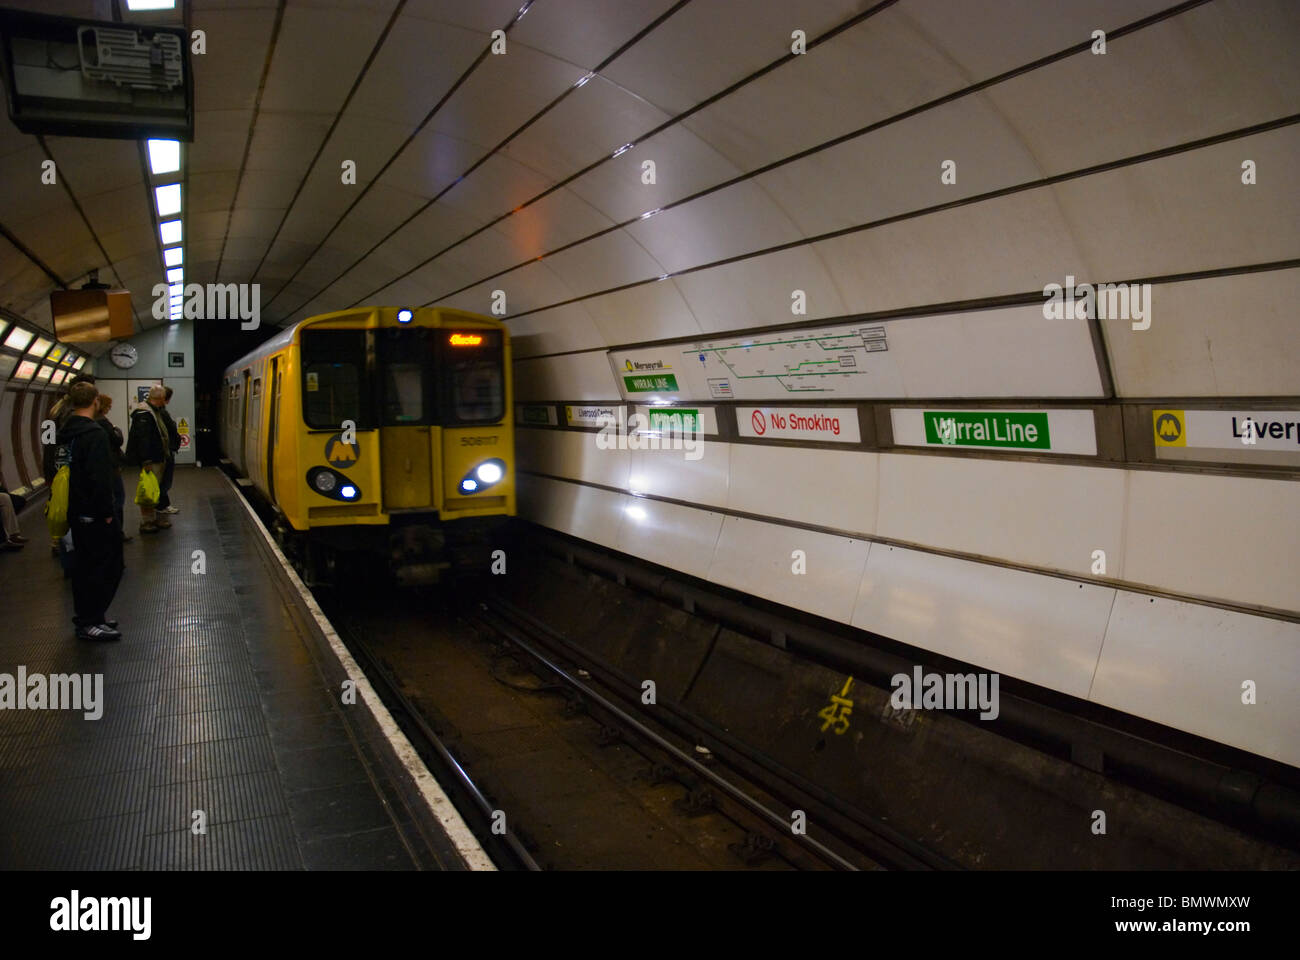 Liverpool central Wirral Line Merseyrail station Liverpool England UK Europe Stock Photo